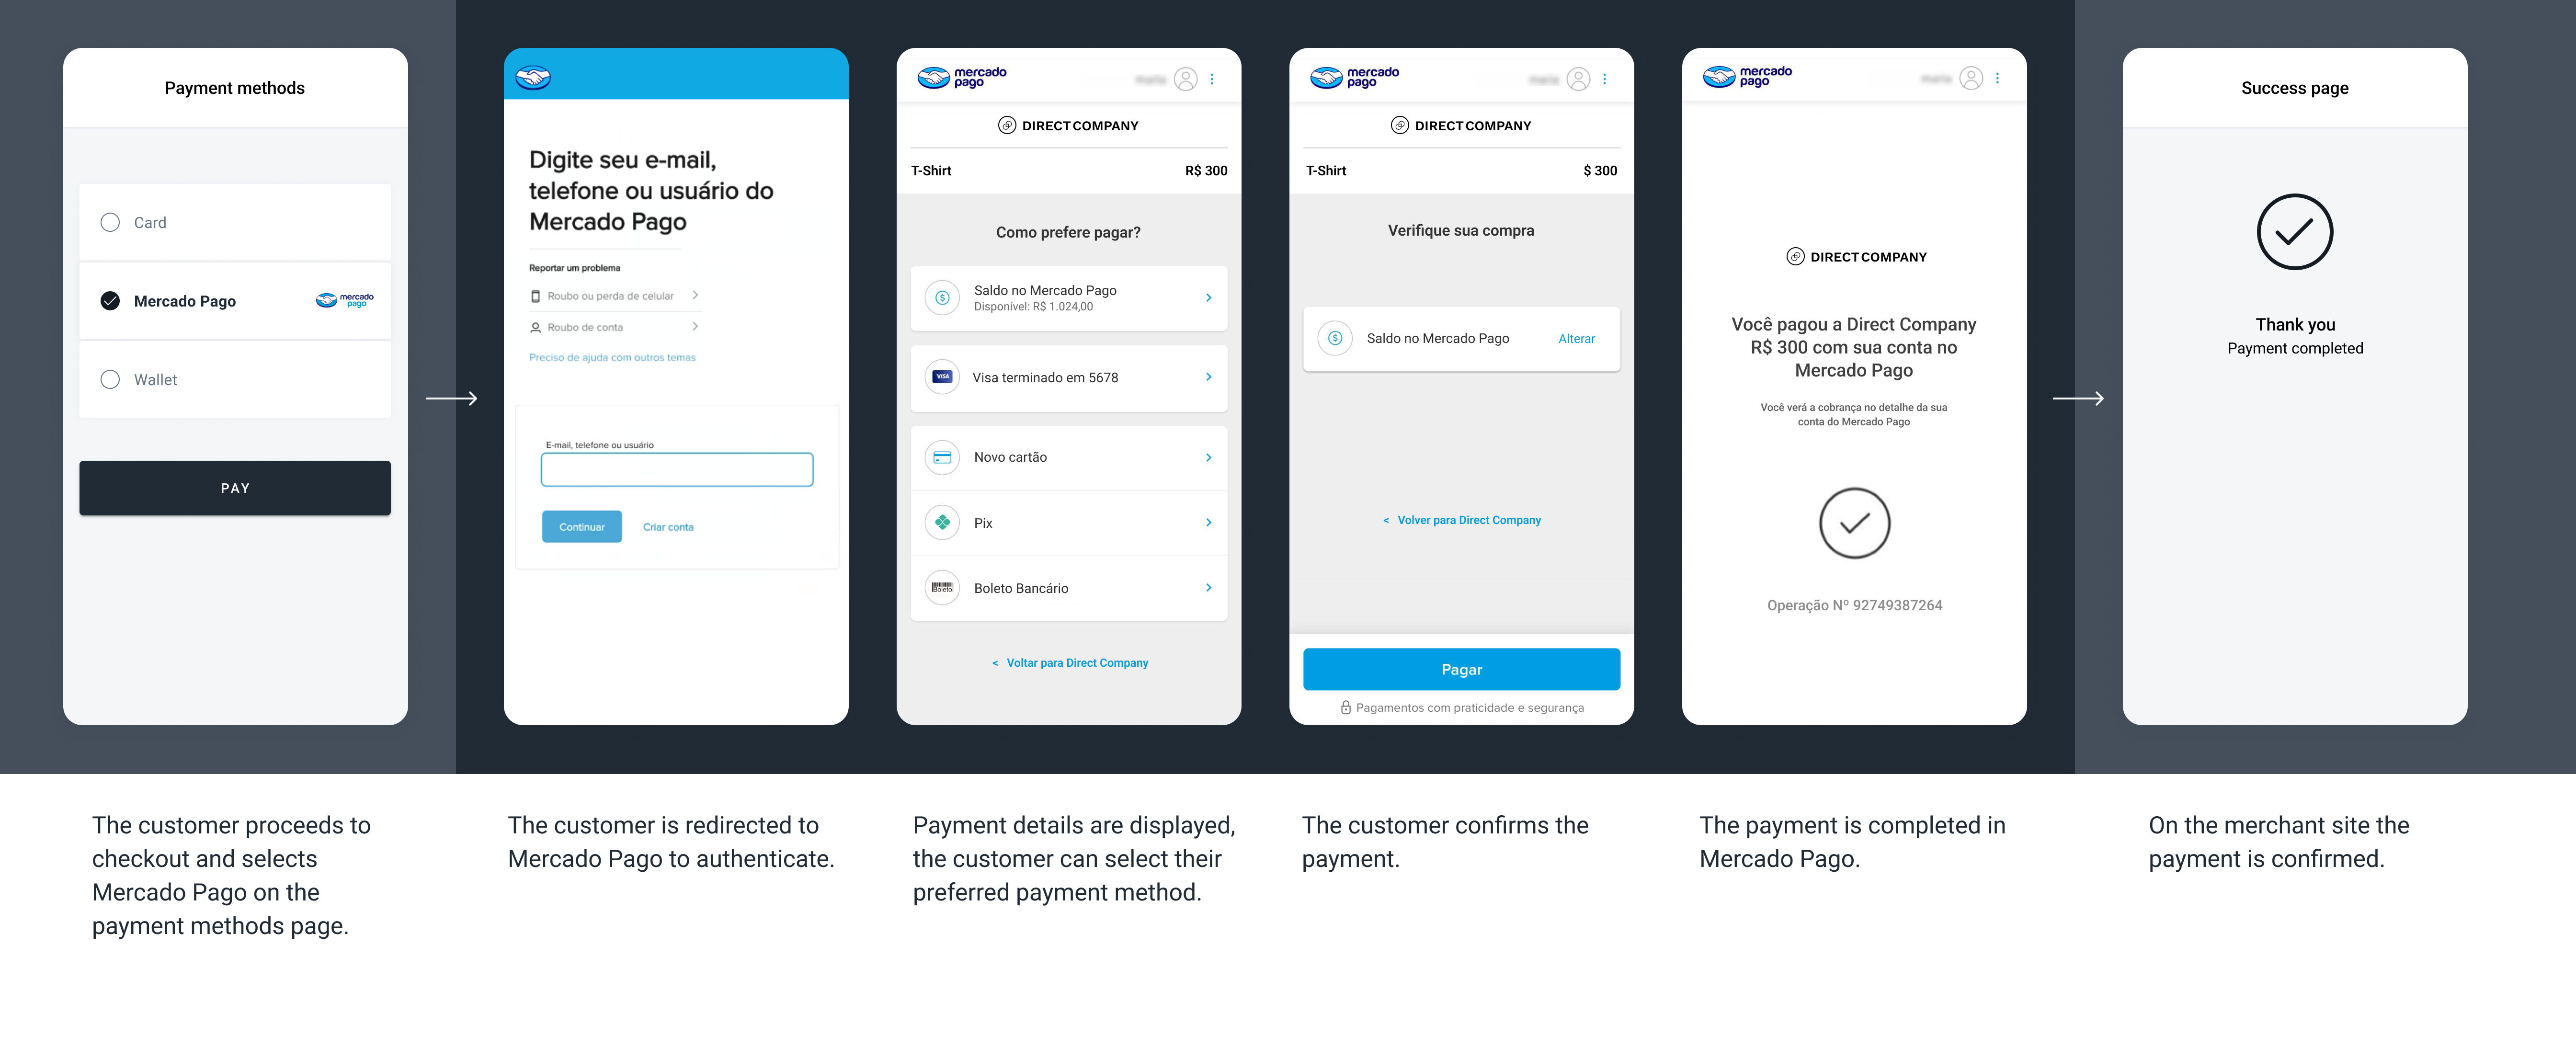 The screenshots illustrate a Mercado Pago one-shot payment redirect flow. The specifics of the flow may vary depending on the payment method selected to complete the payment.